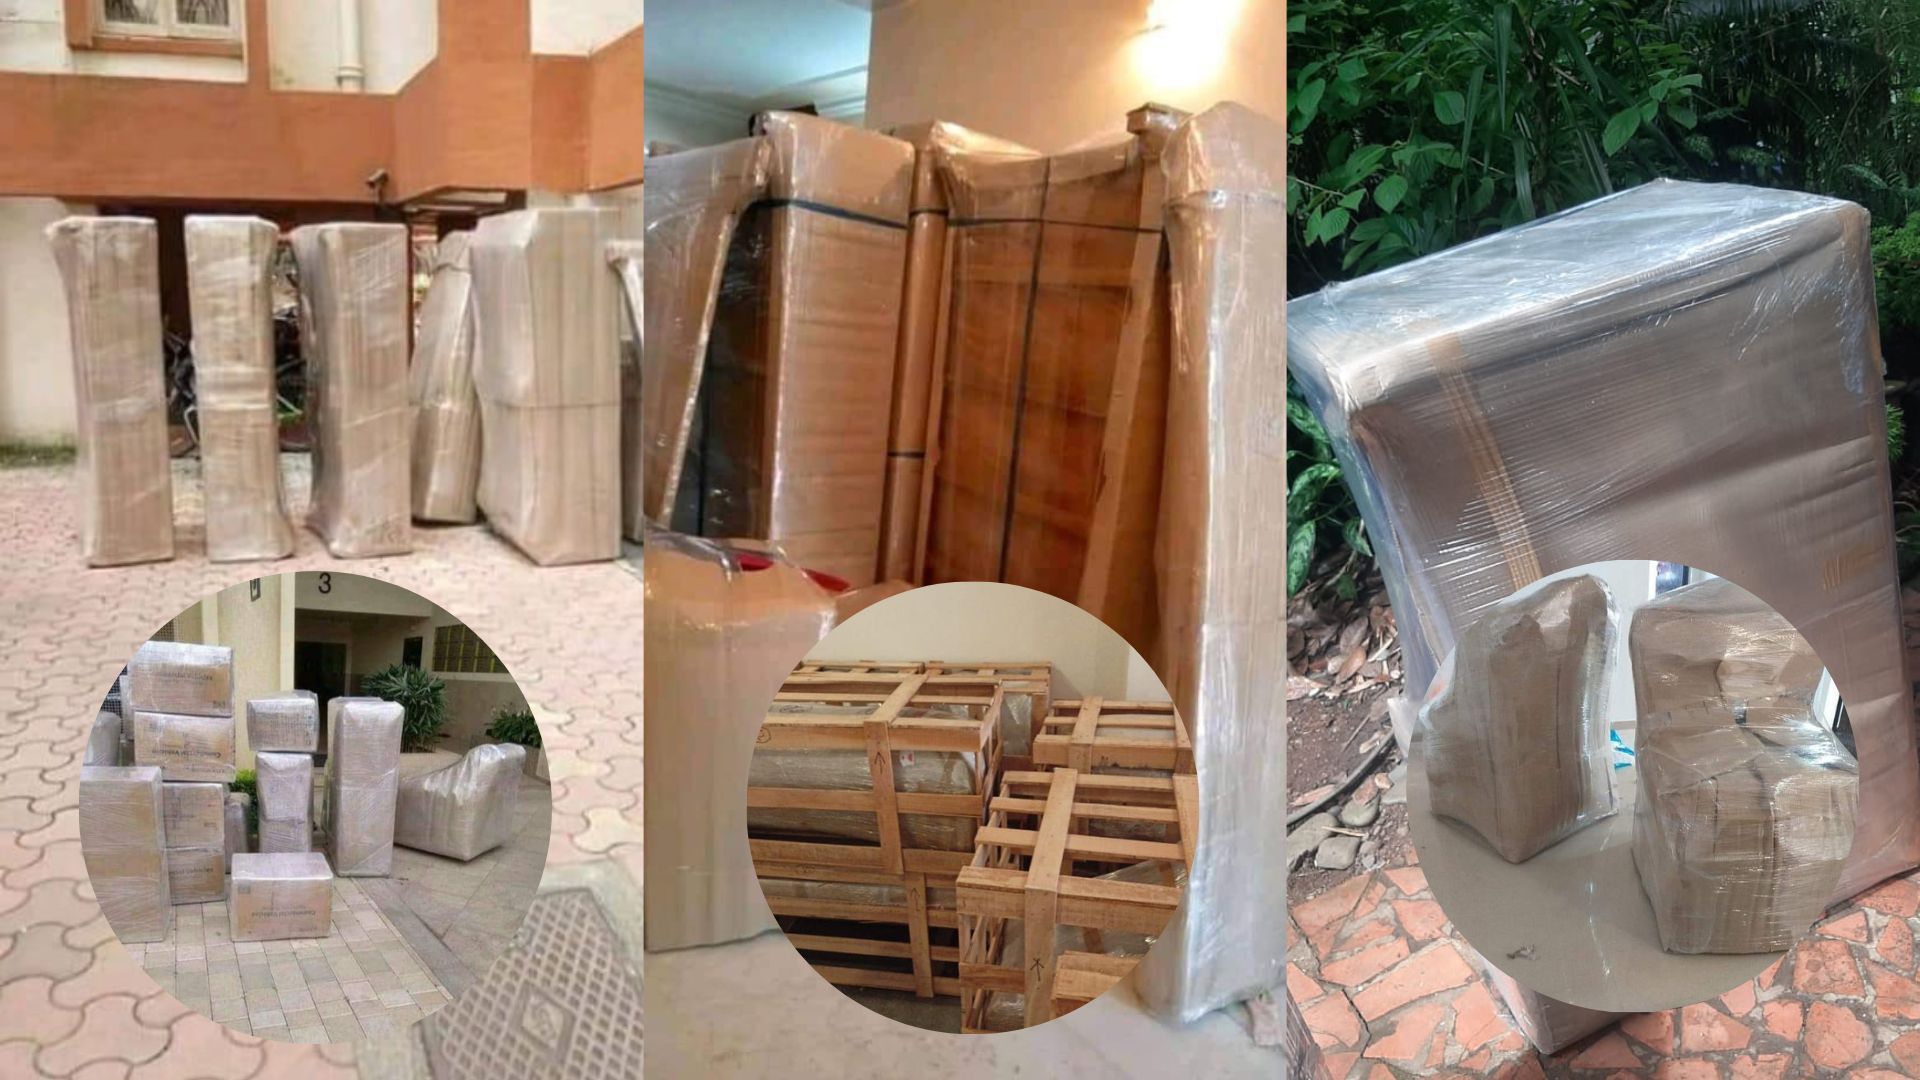 Rehousing packers and movers aim to satisfy the customer